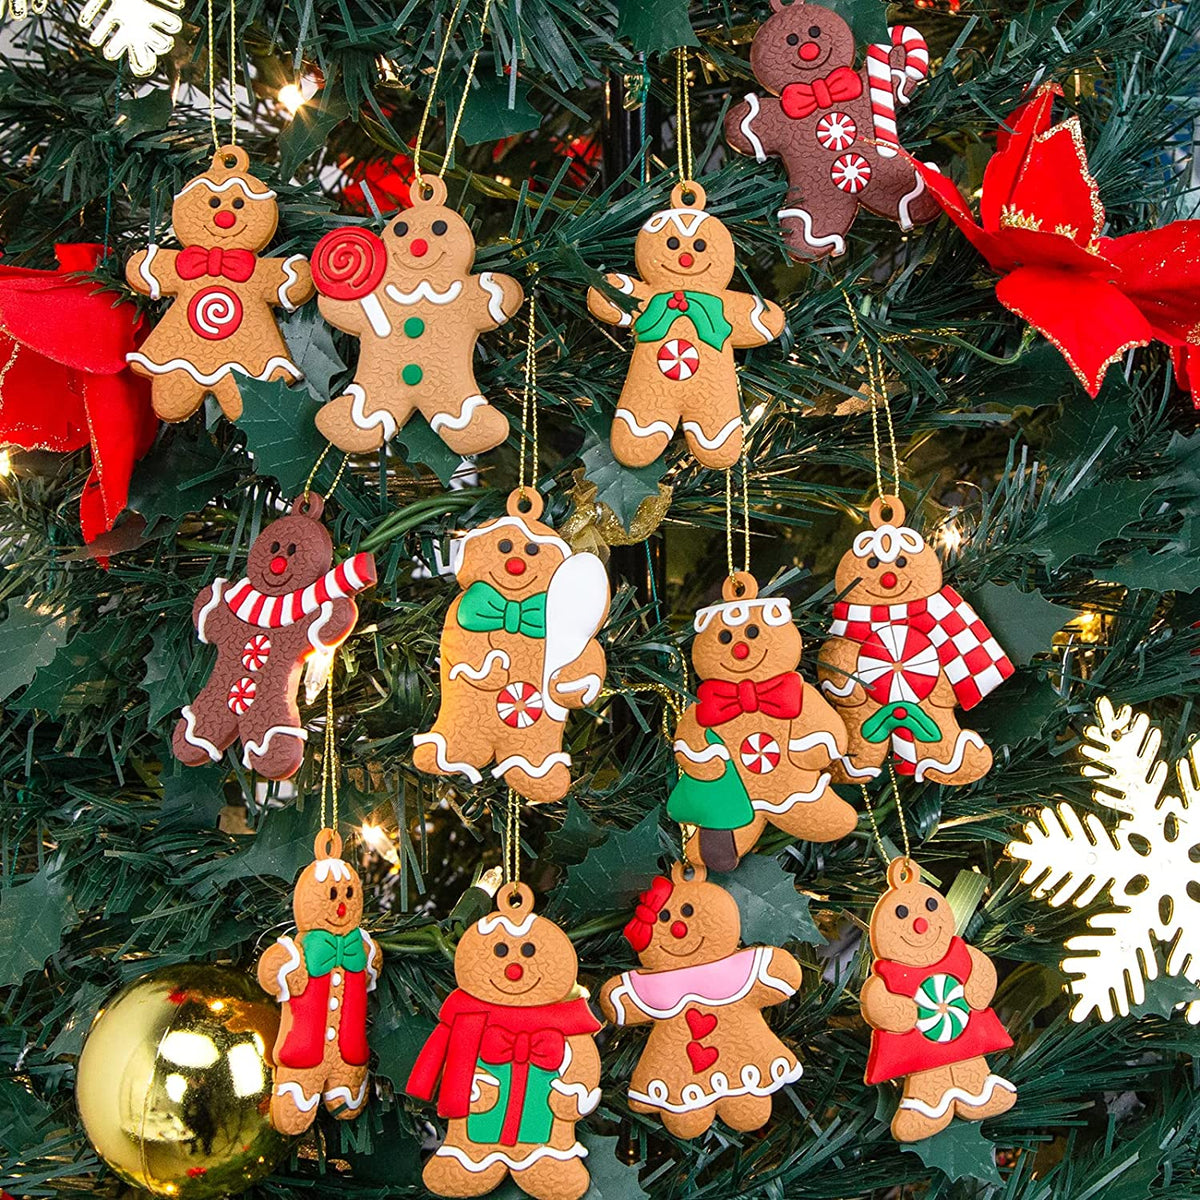 AMOR PRESENT Gingerbread Man Ornaments Christmas Figurine for Christmas Tree Hanging Decorations for Kids Adults